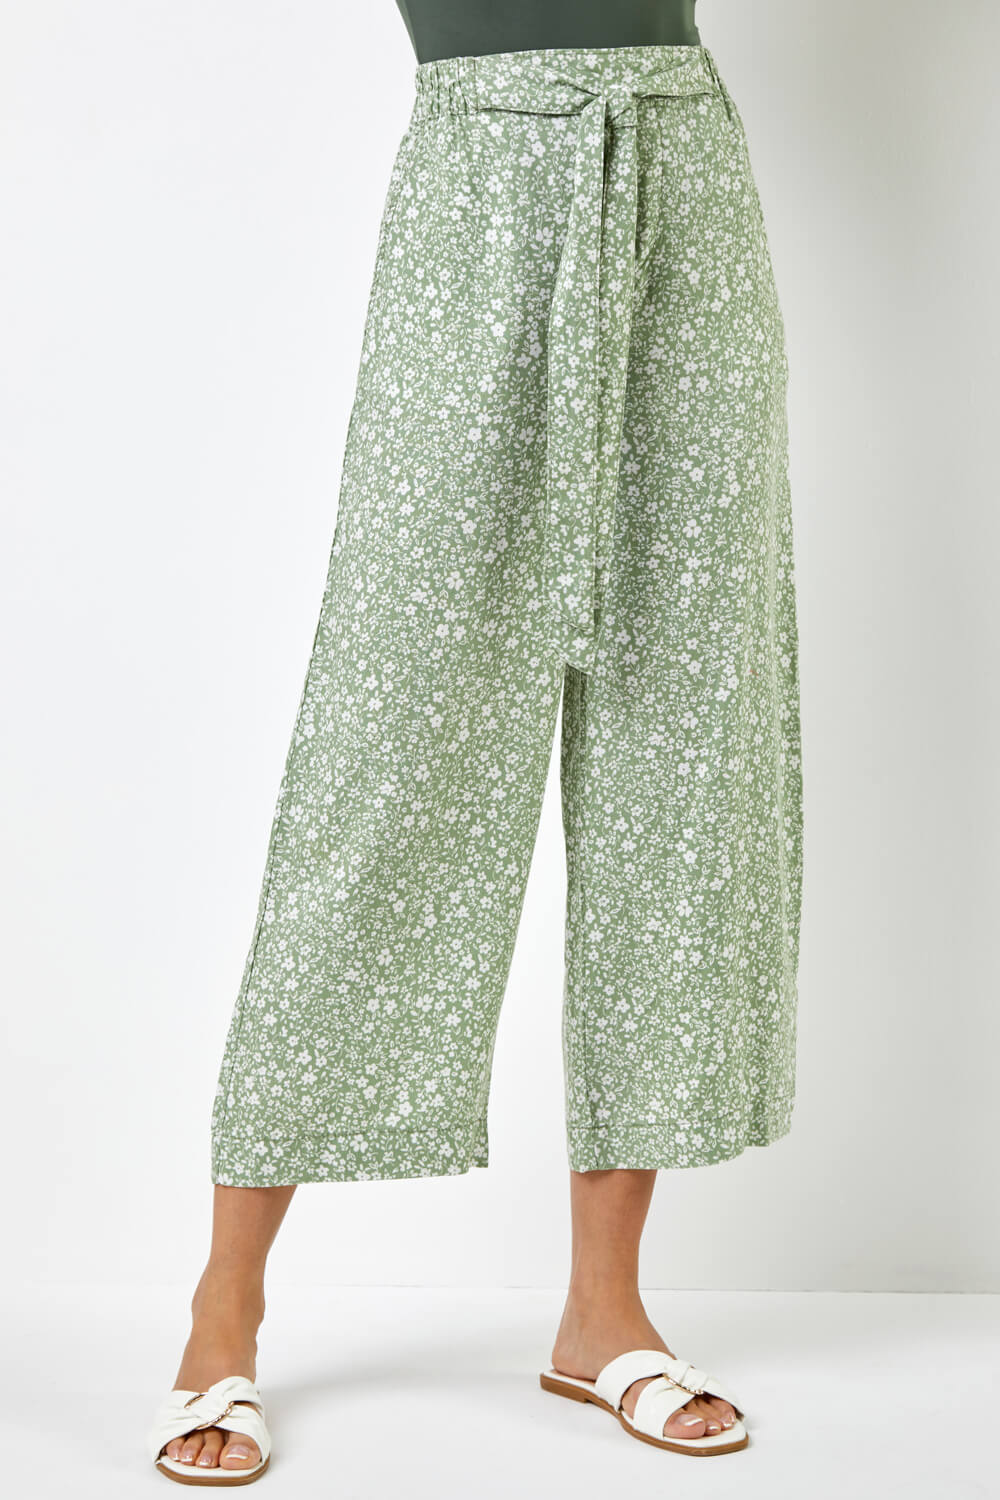 Sage Ditsy Floral Print Waist Tie Culottes, Image 2 of 5